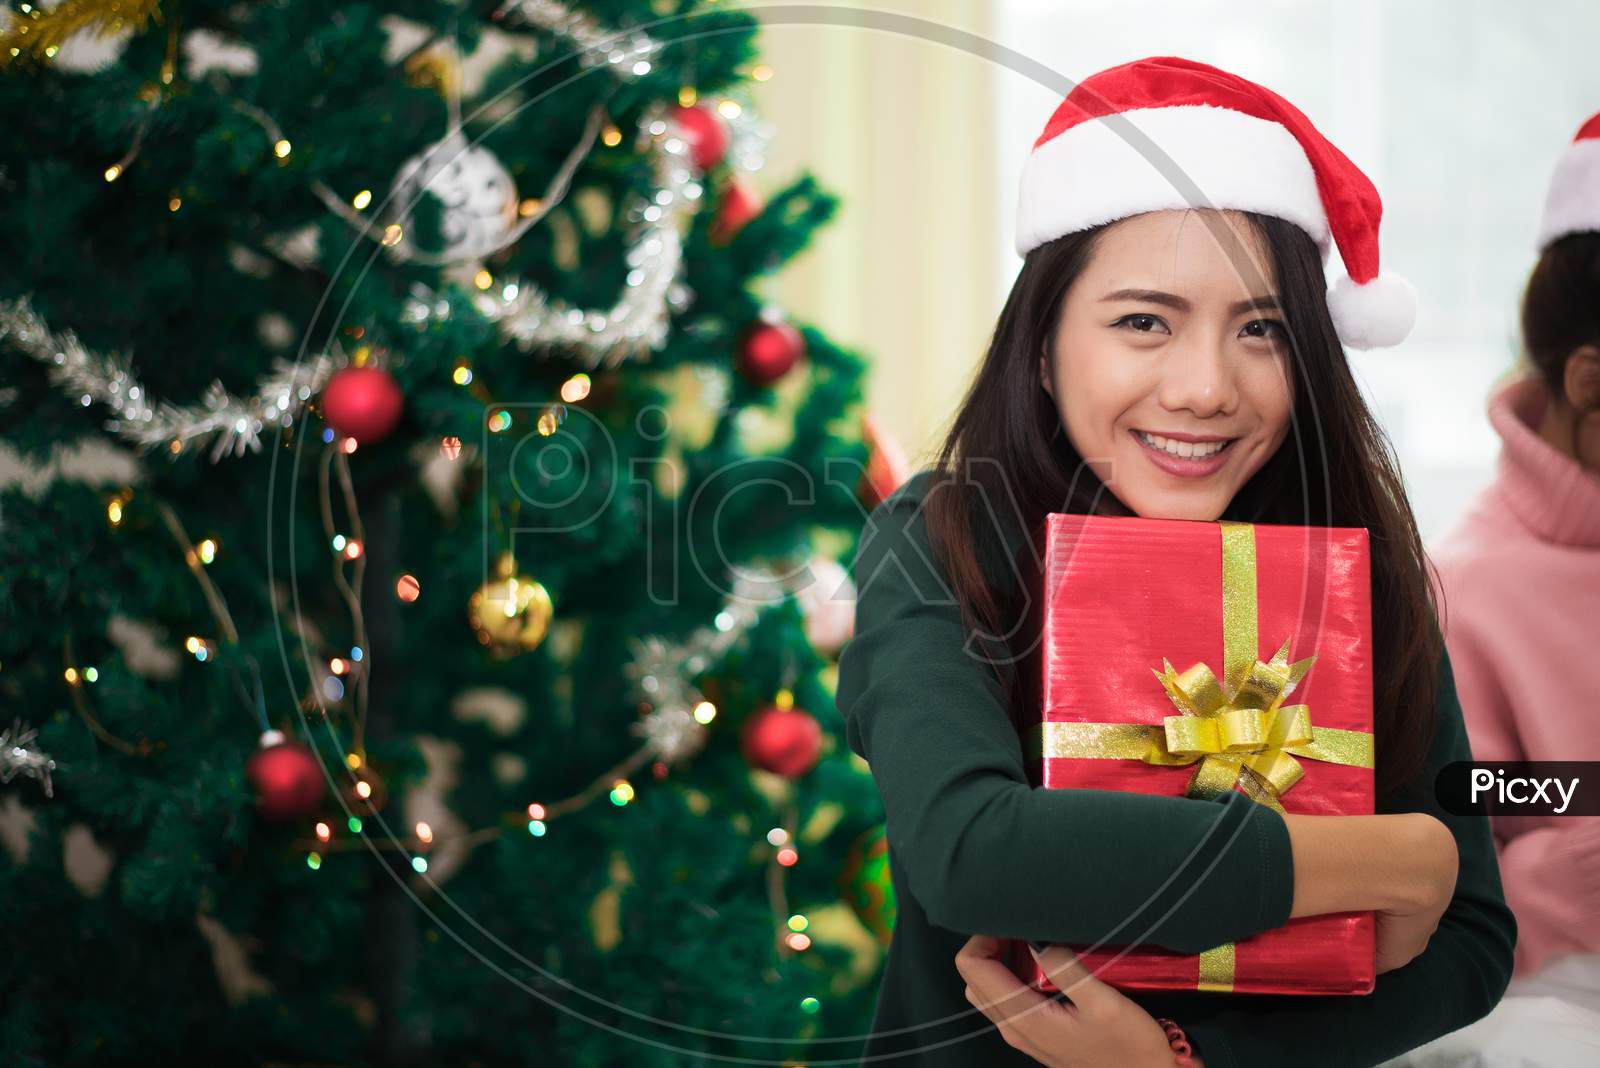 Asian Woman Holding A Gift Or Present With Christmas Tree And Decor. Xmas And New Year Concept. Holiday Theme